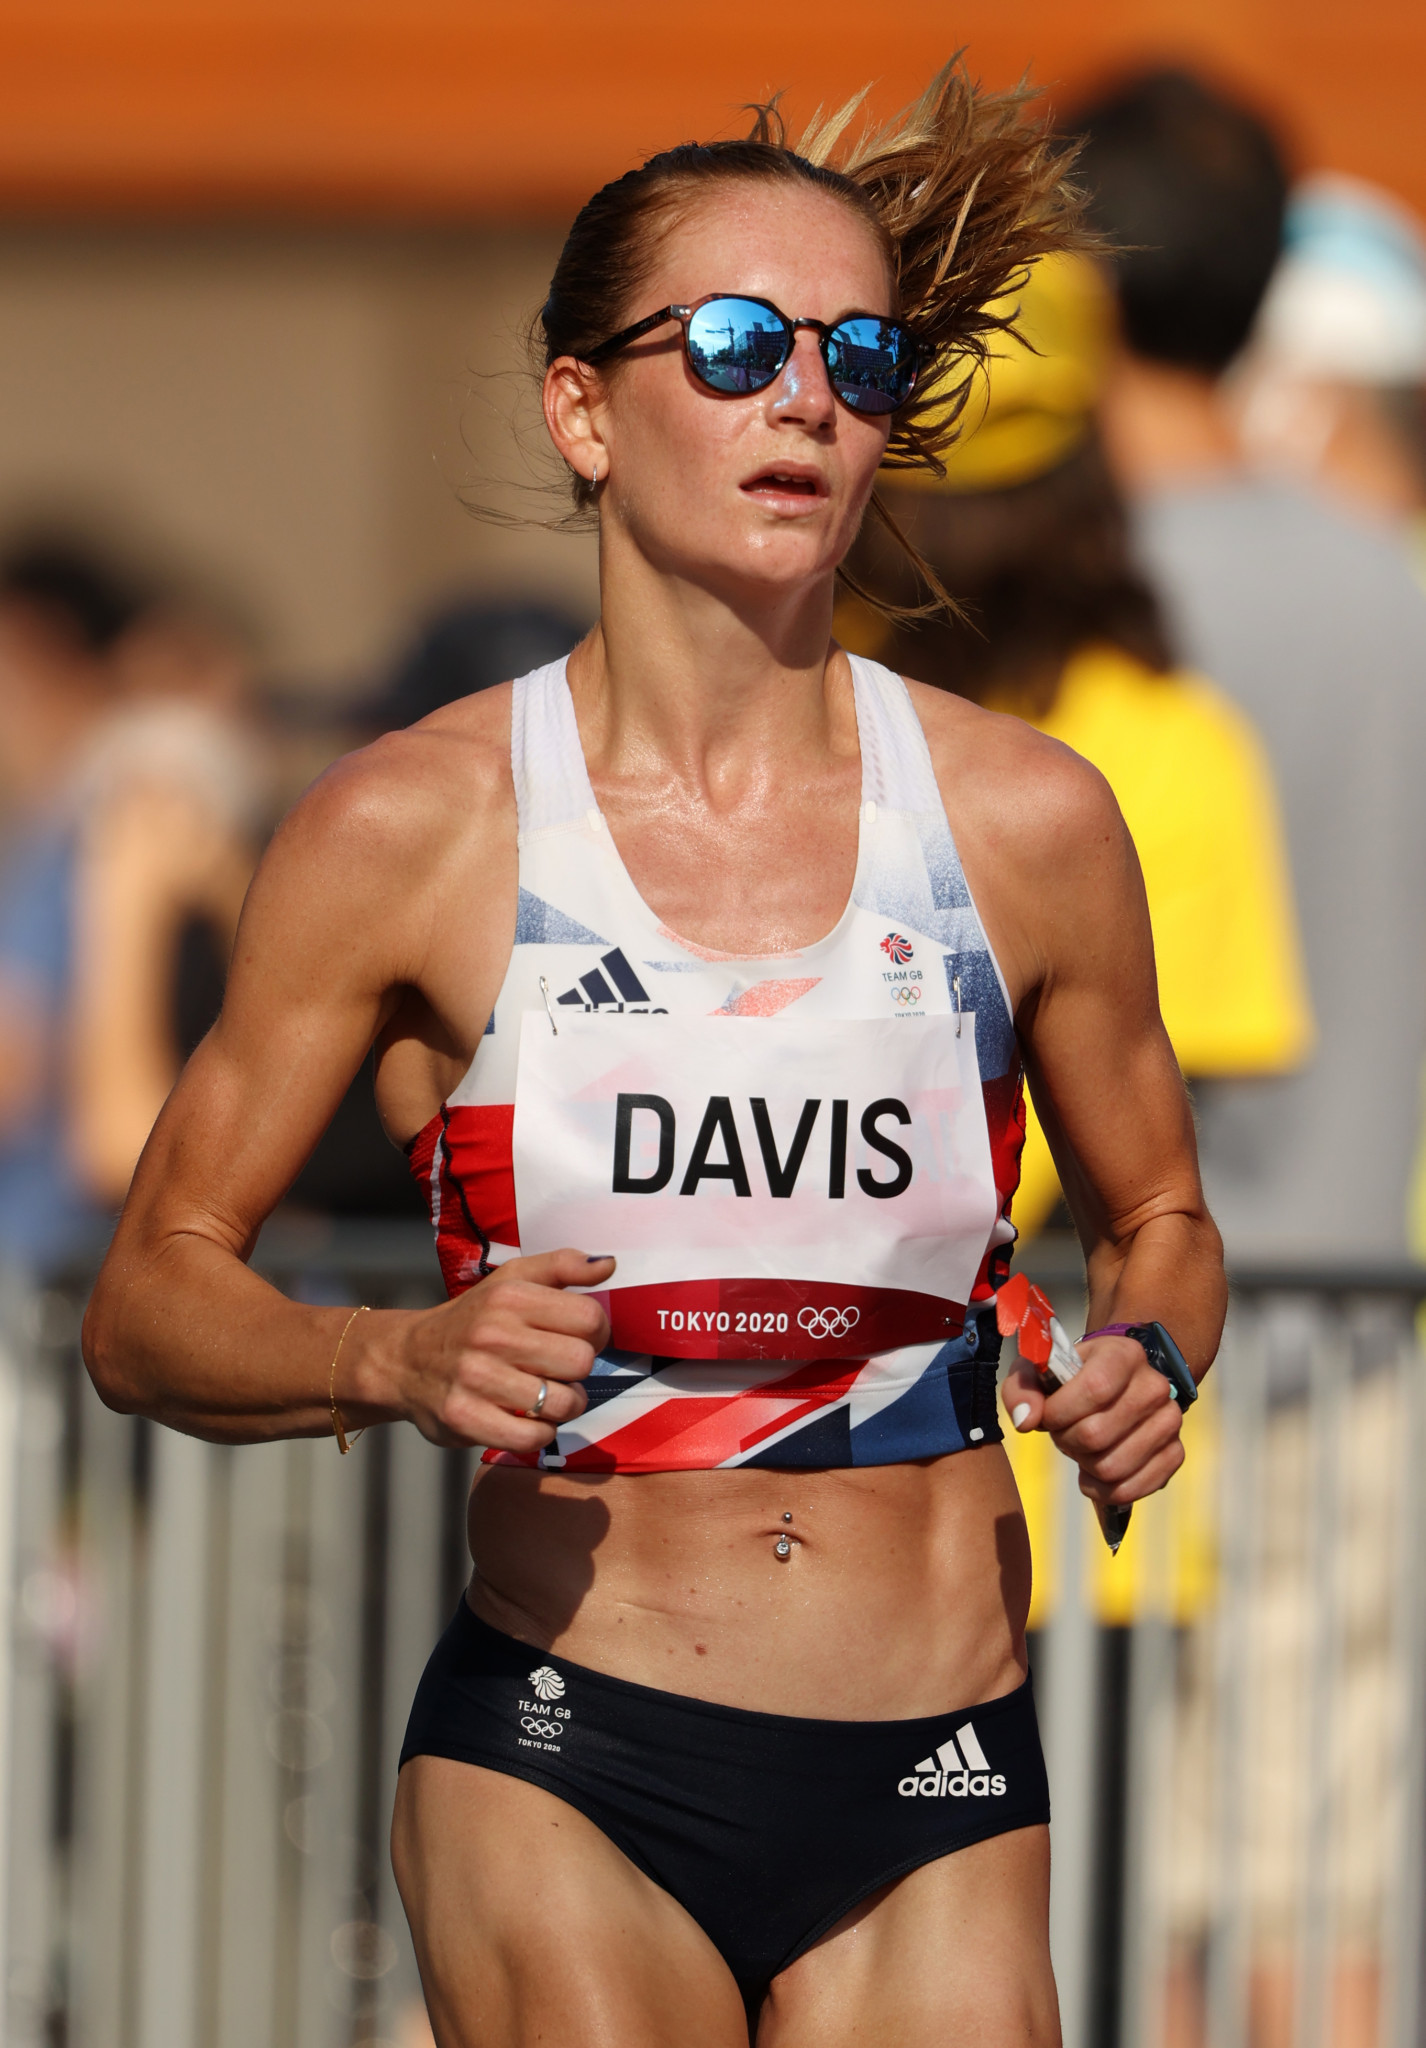 Steph Davis competed for Britain in the women's marathon in Tokyo 2020 ©Getty Images